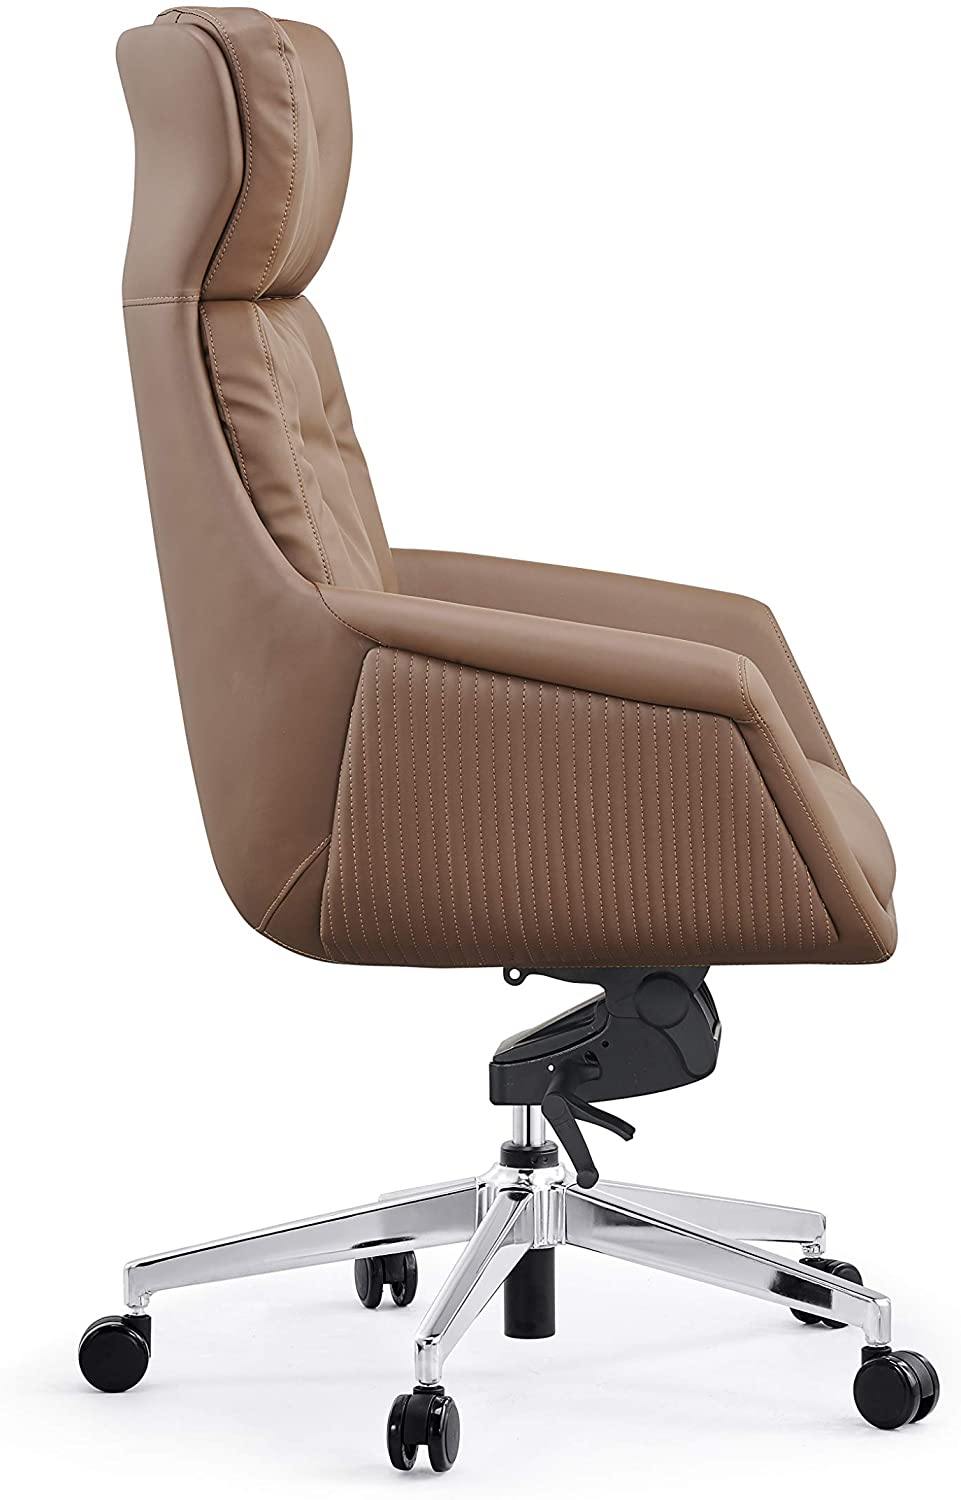 High Back Swivel Chair for Desk with Adjustable Height Handle Office Armchair PU Leather Ergonomic Desk Chair, Brown - Bosonshop